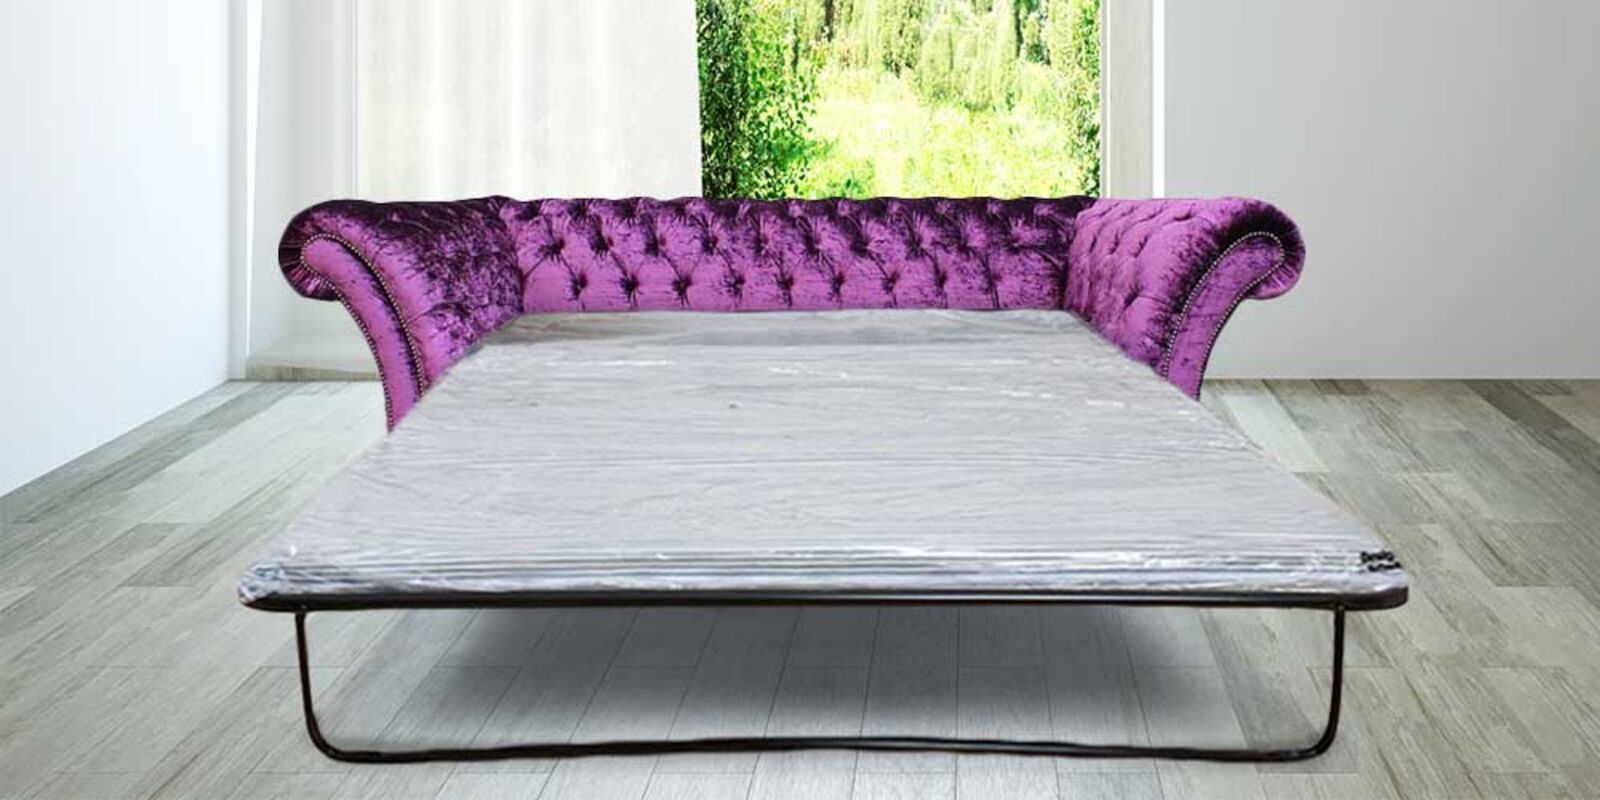 Product photograph of Chesterfield Cambridge Purple 3 Seater Sofabed Settee Boutique Crush Velvet Fabric from Designer Sofas 4U